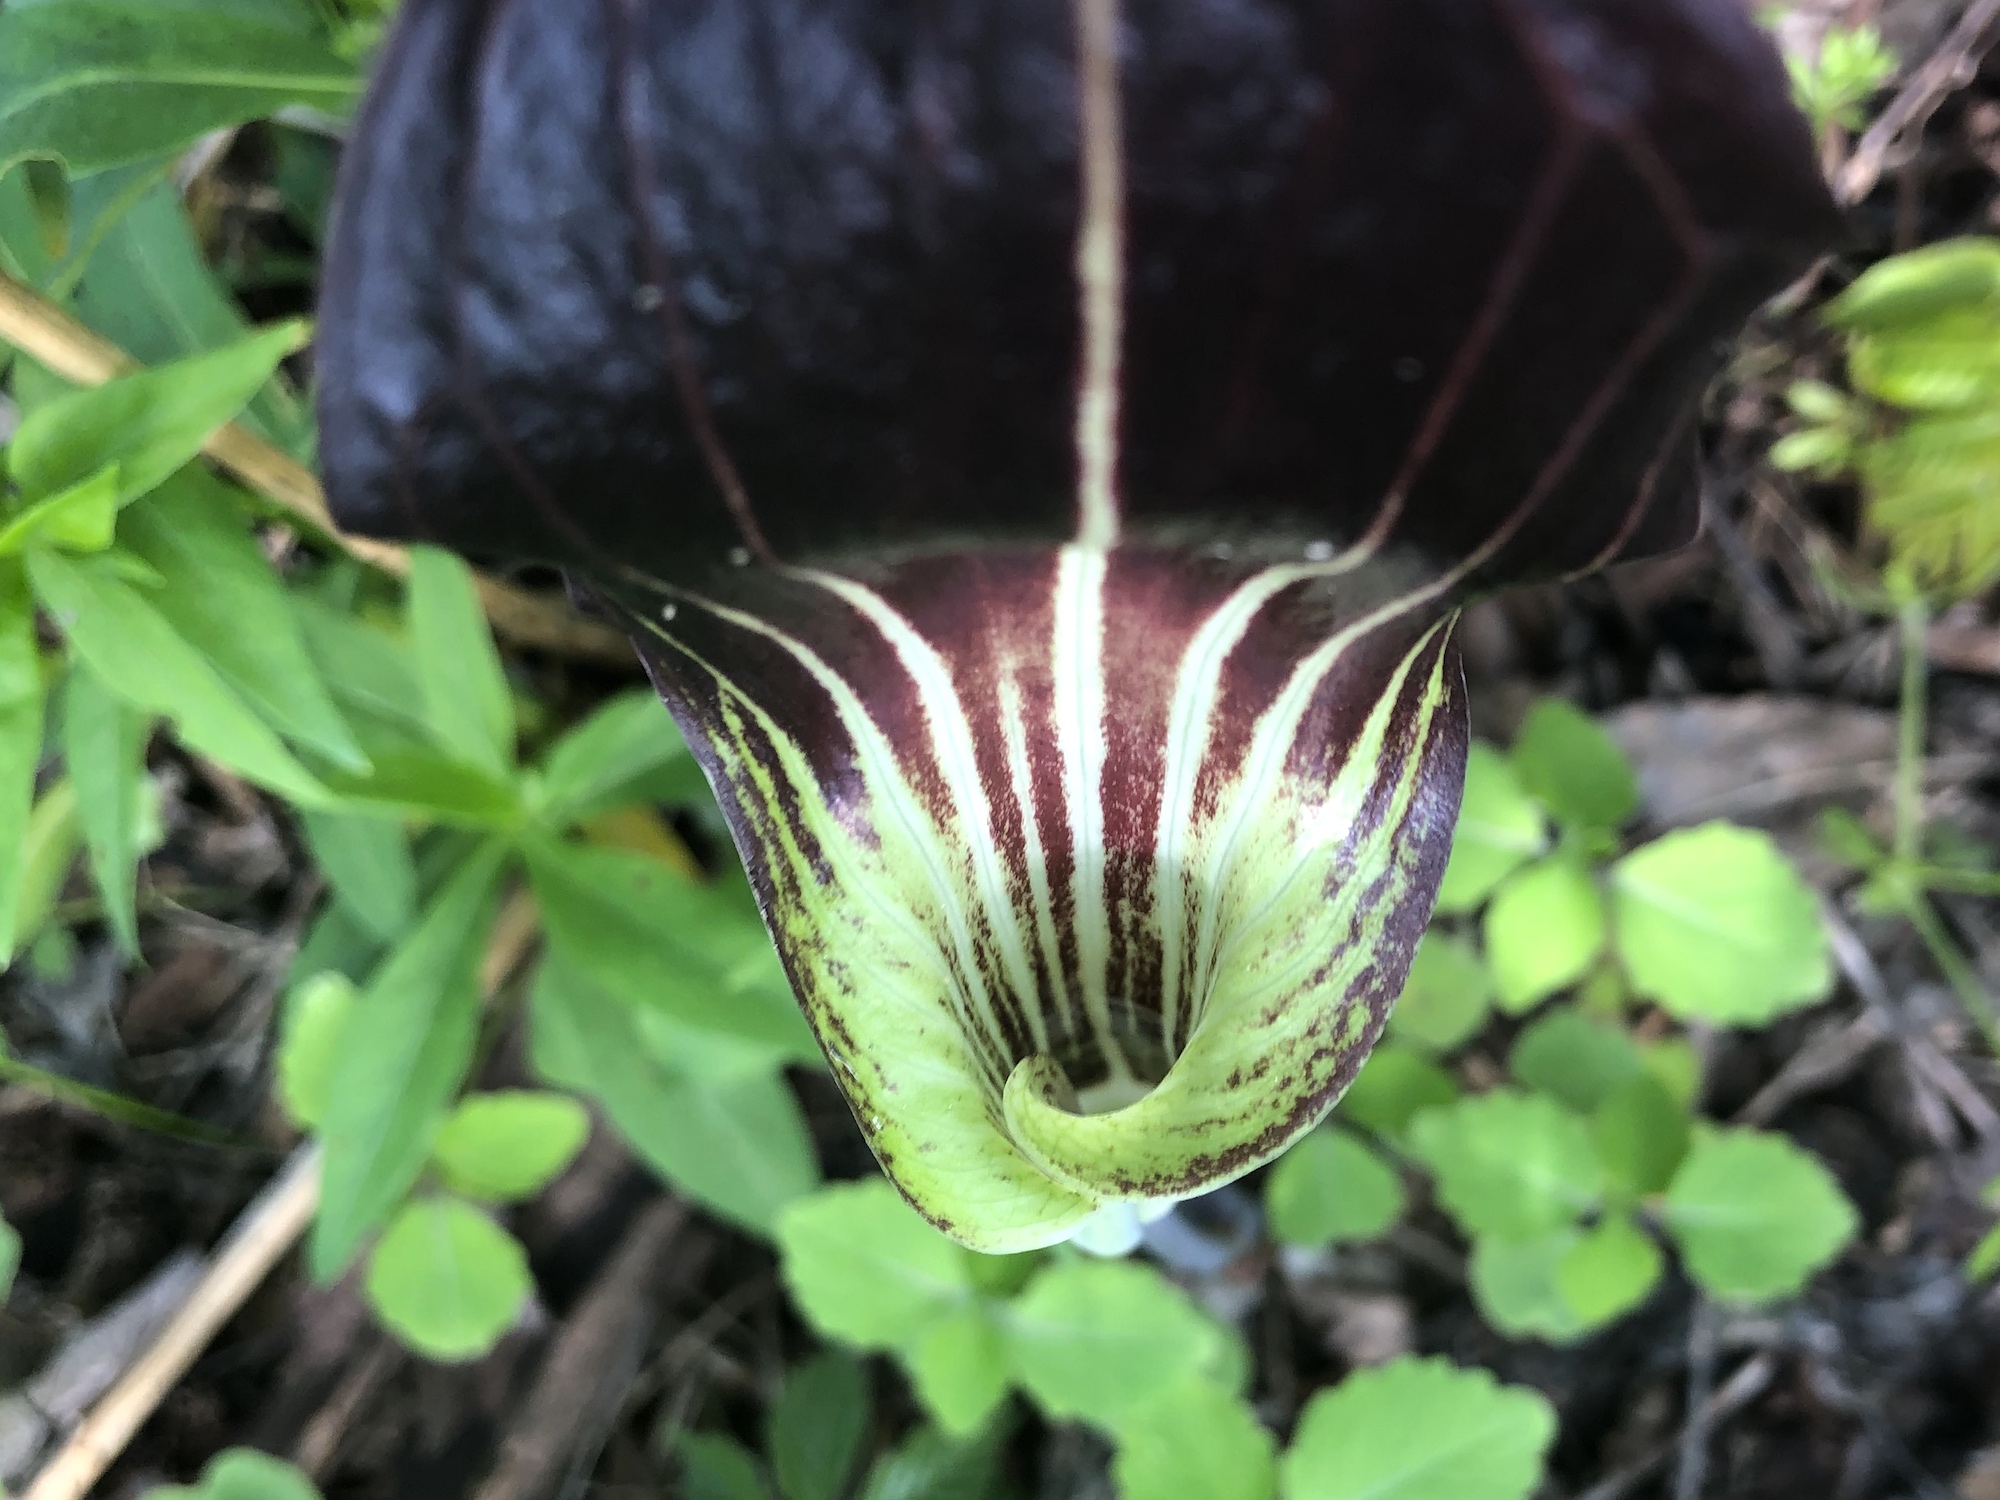 Jack-in-the-pulpit with no "Jack" by Duck Pond parking lot on May 13, 2020